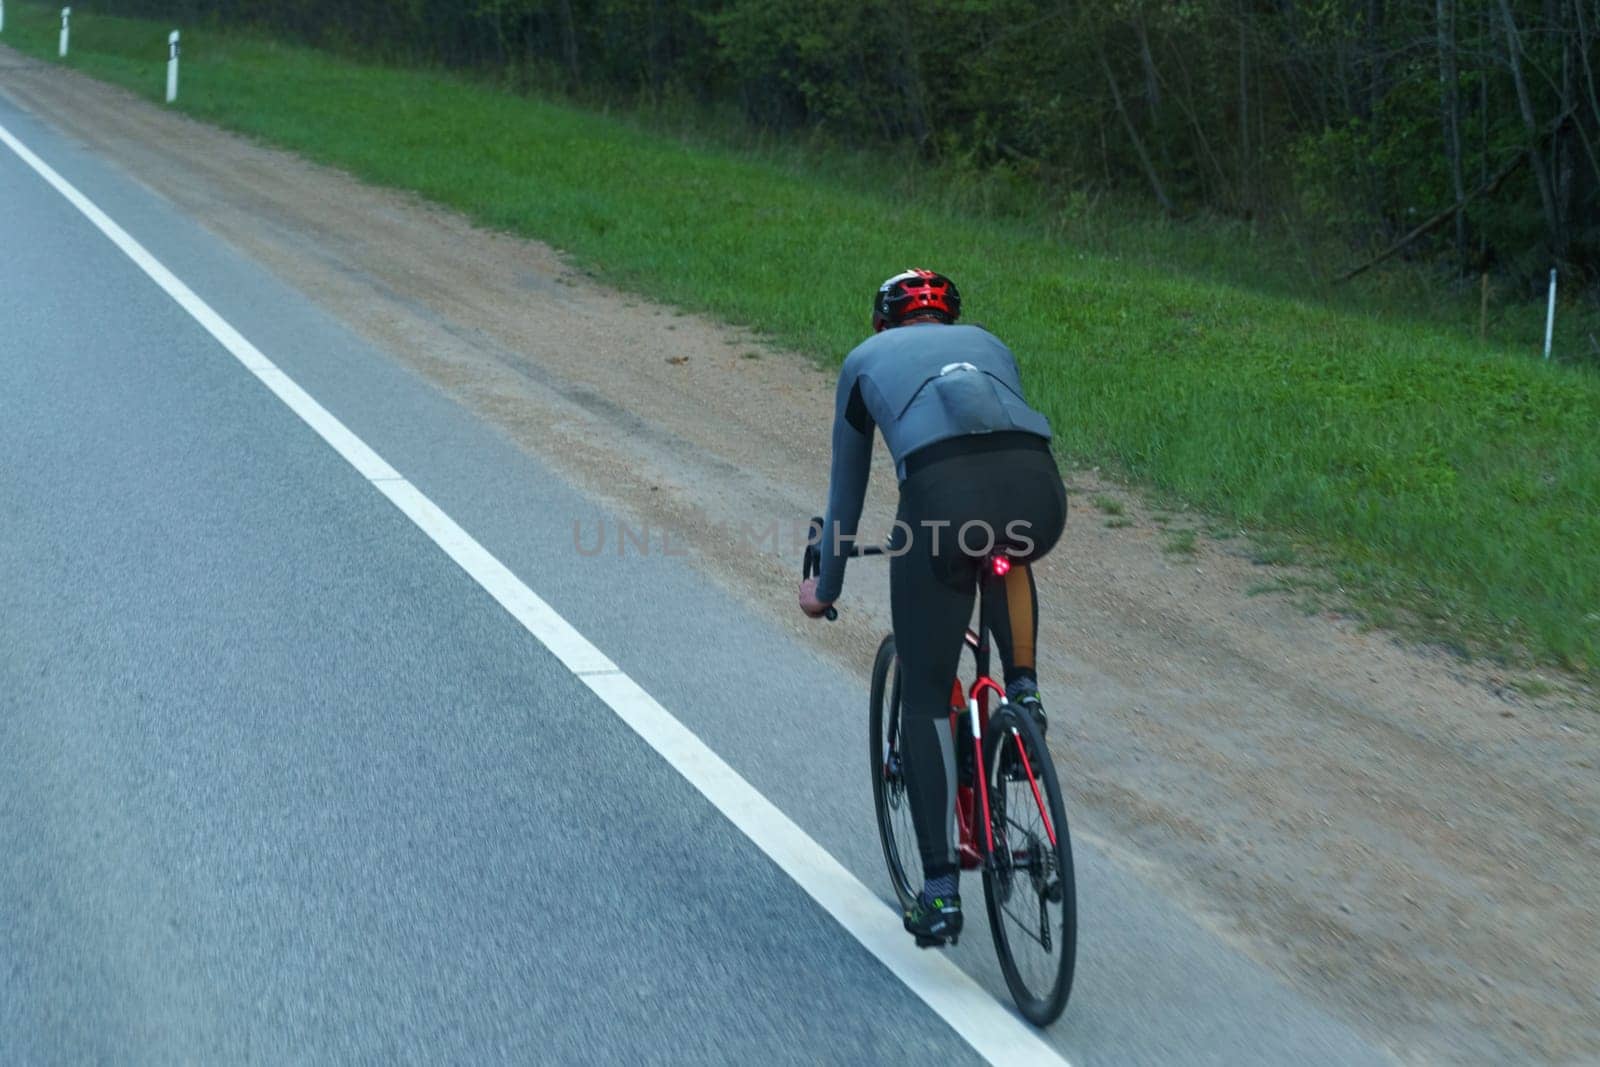 Pasvalys, Lithuania - May 3, 2023: A cyclist in a helmet and sportswear rides a road bike along a rural highway with trees in the background, signaling the end of the day.